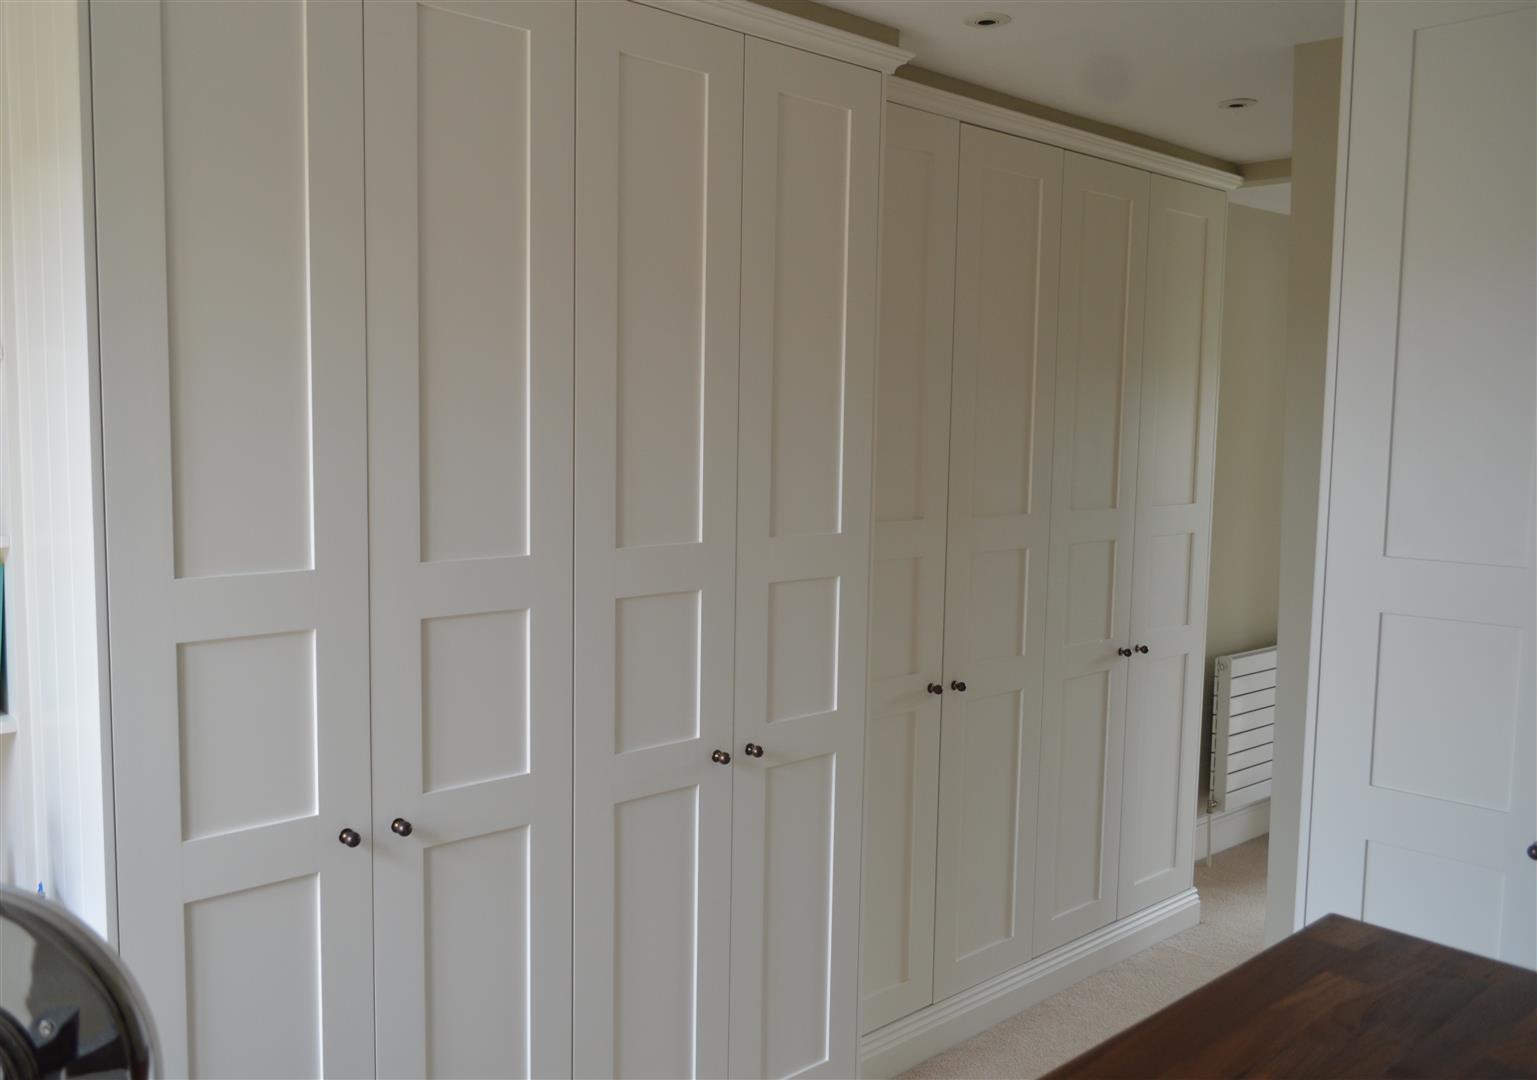 Another view of a bank of shaker doors.